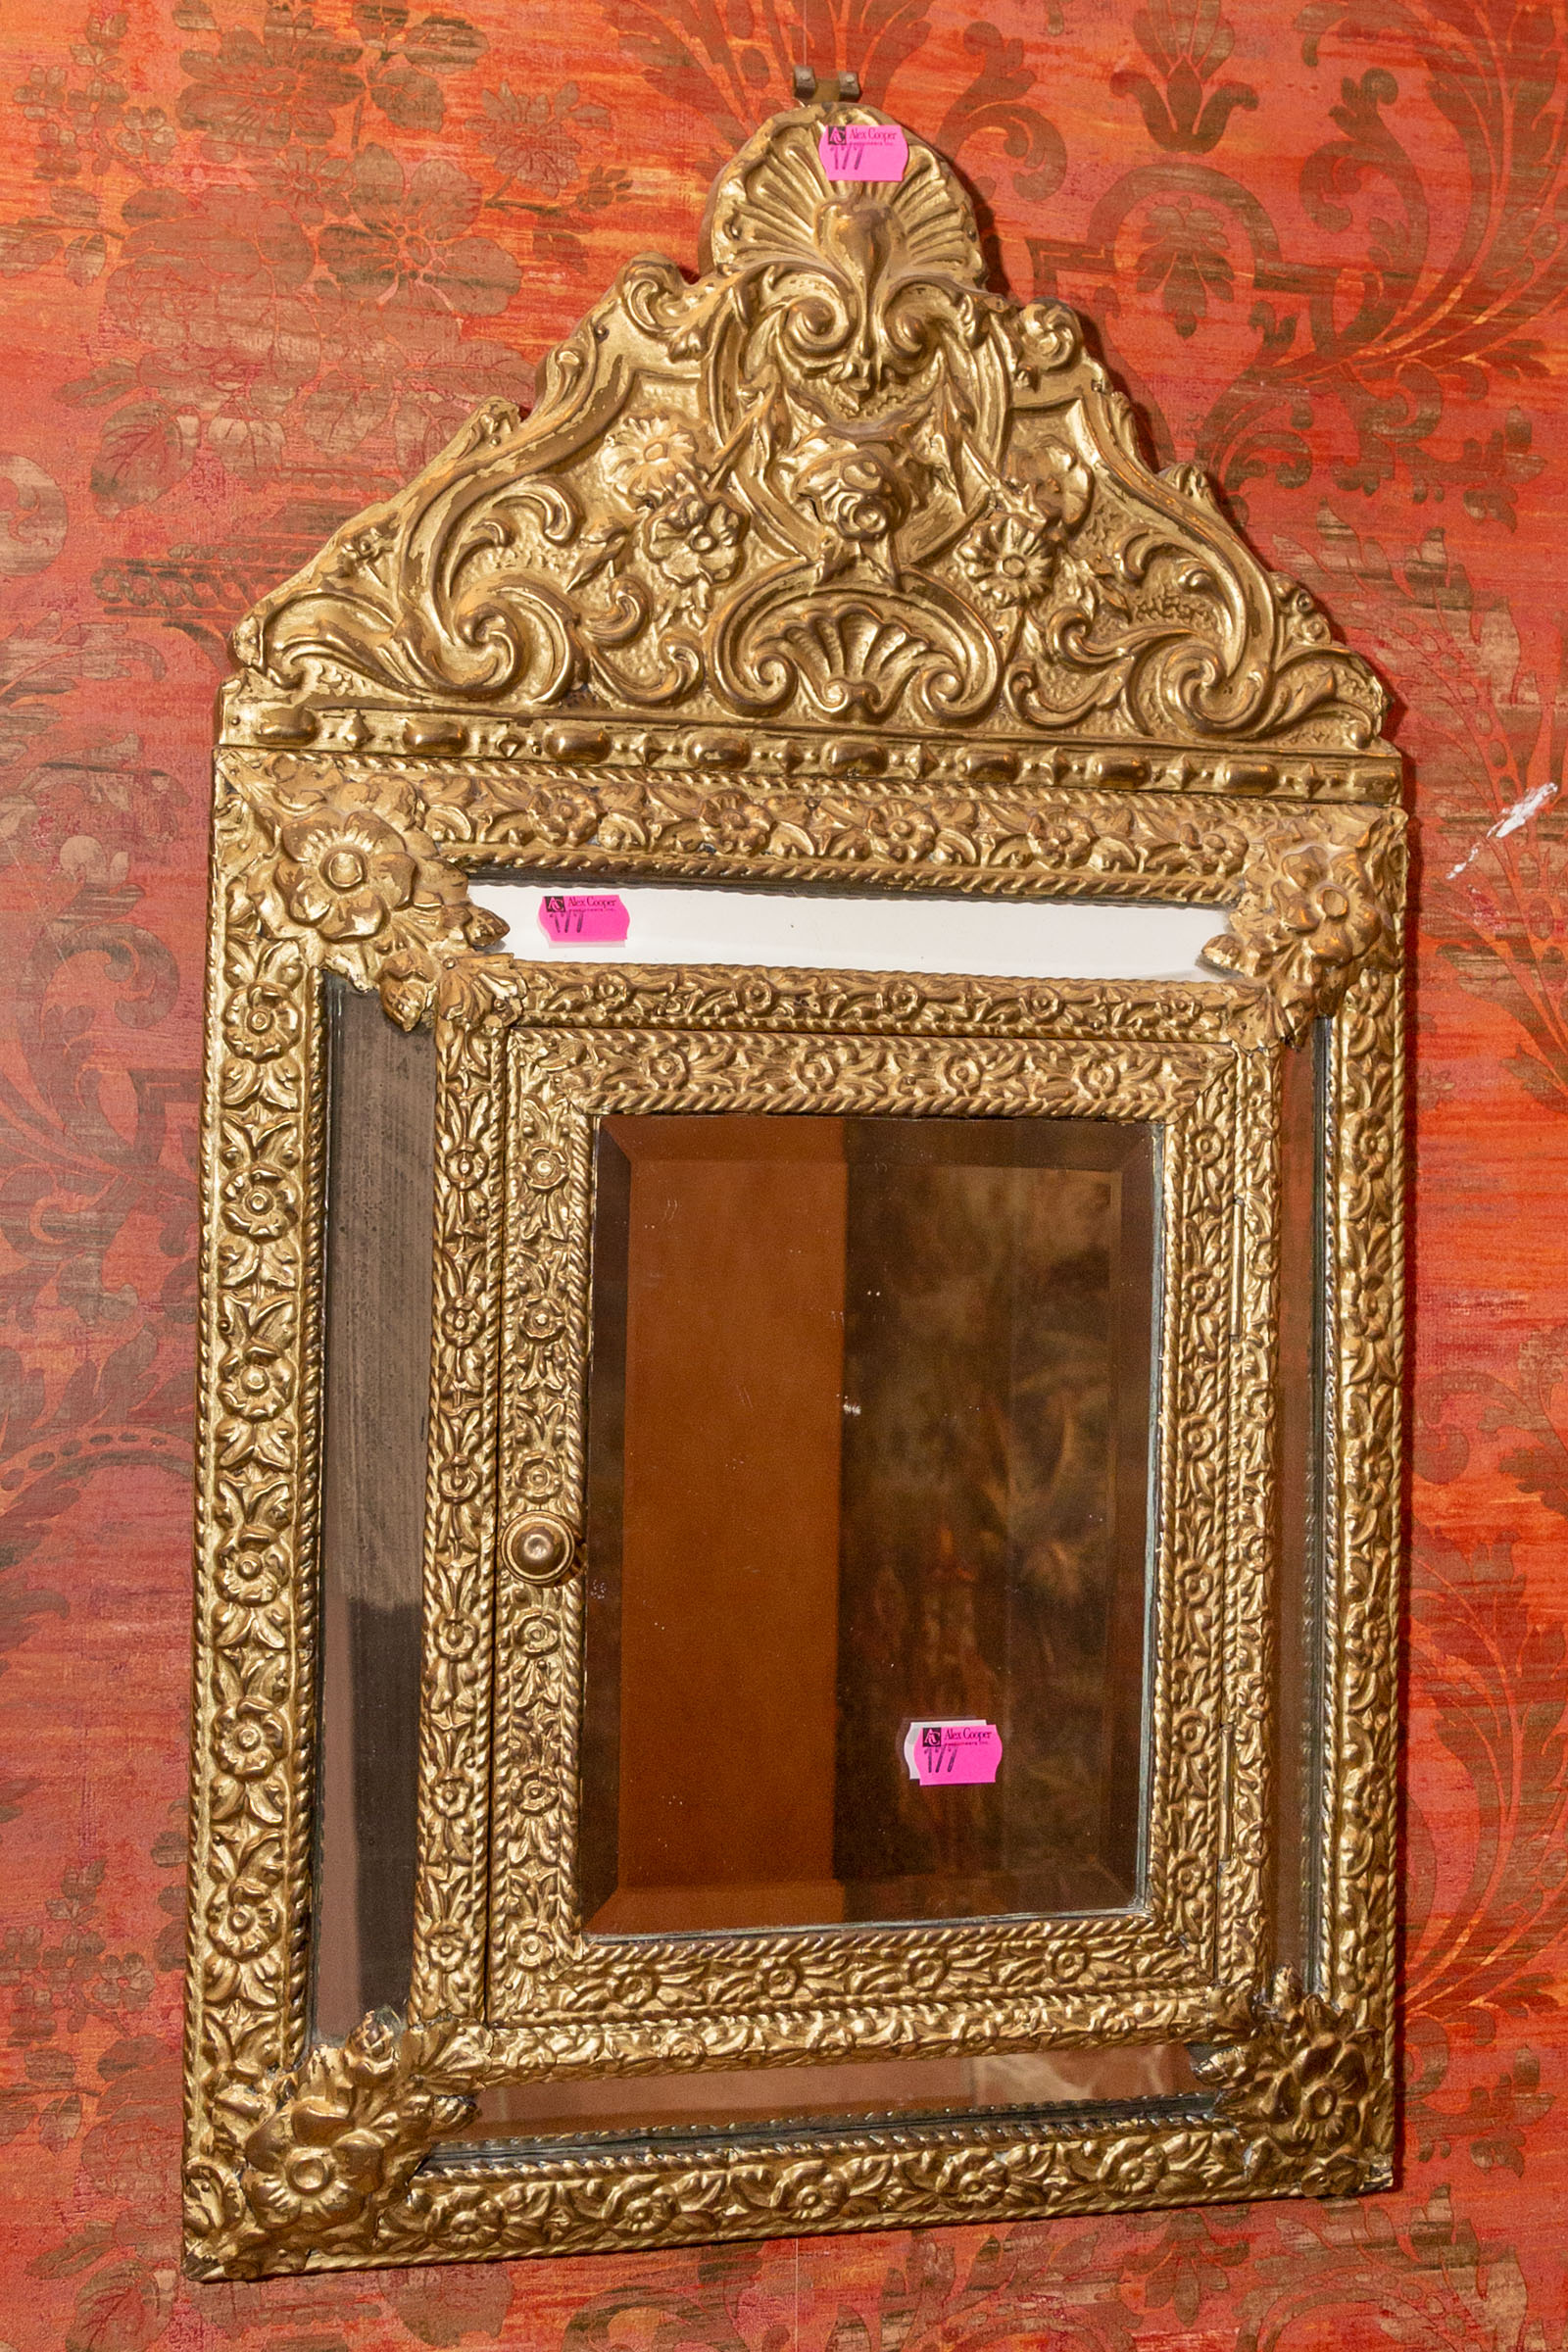 A HANGING WALL MOUNTED CABINET WITH